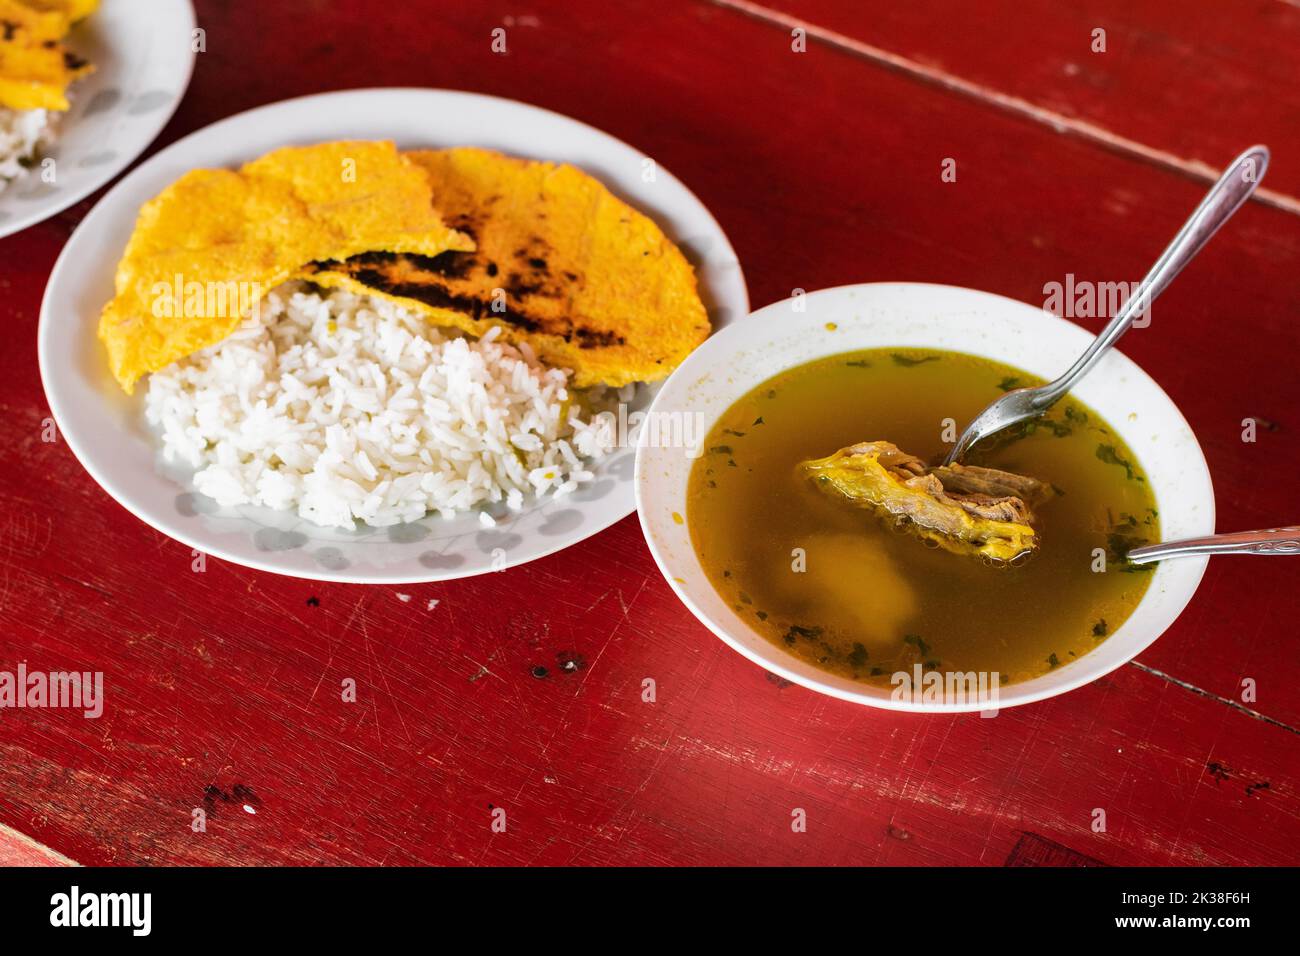 view from above of a delicious colombian breakfast made with beef broth, rice, yellow arepa and natural spices such as coriander and cimarron. typical Stock Photo